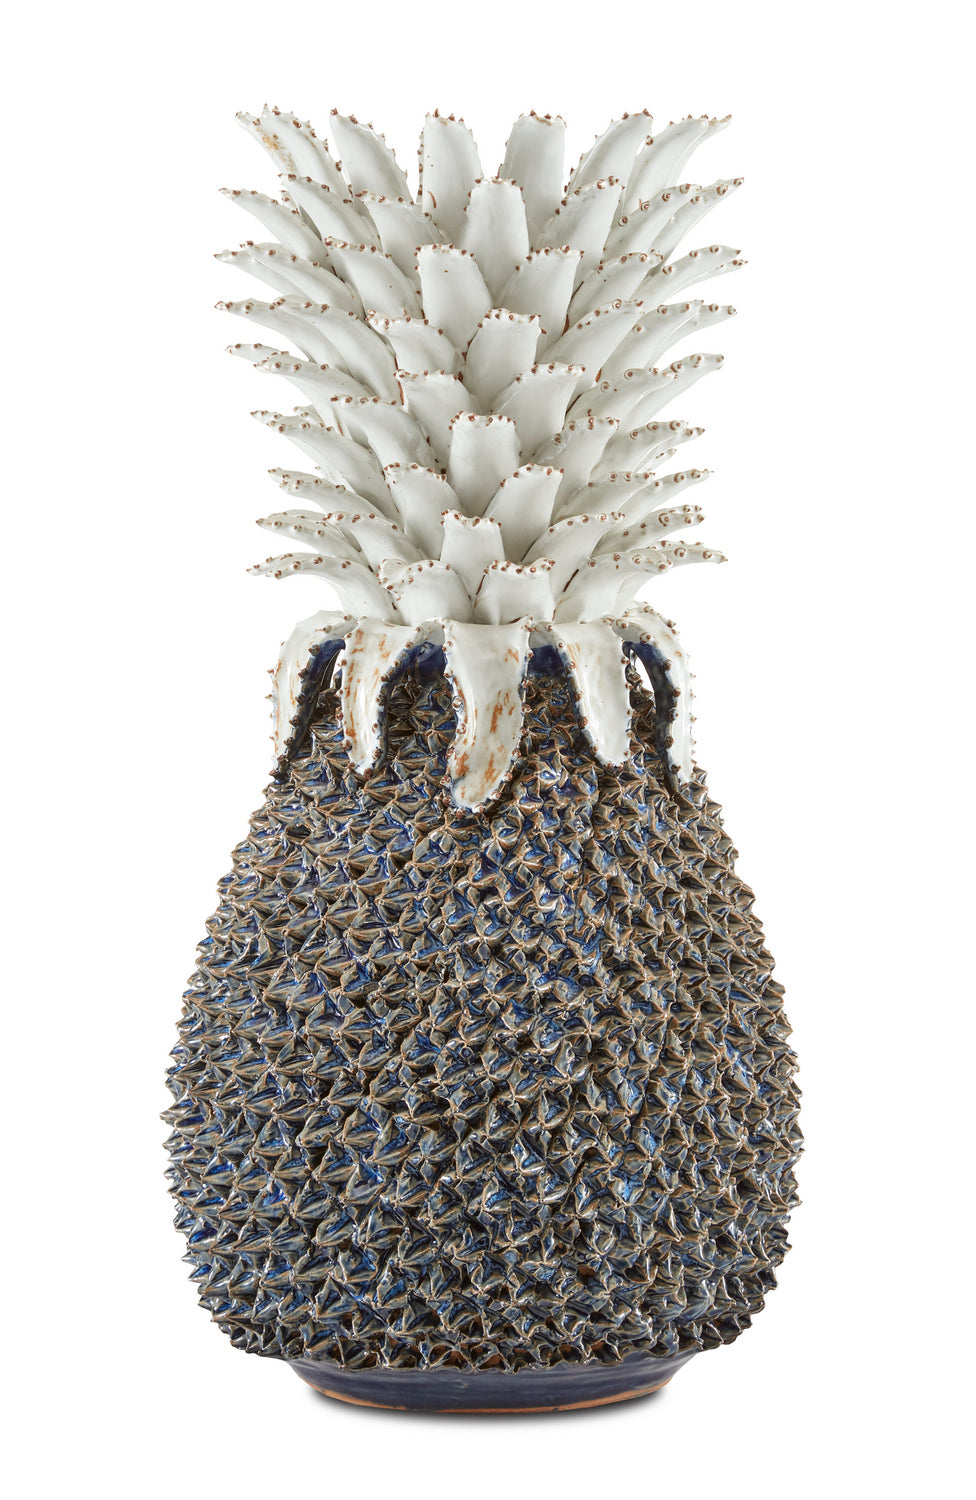 Pineapple from the Waikiki collection in Blue/White finish